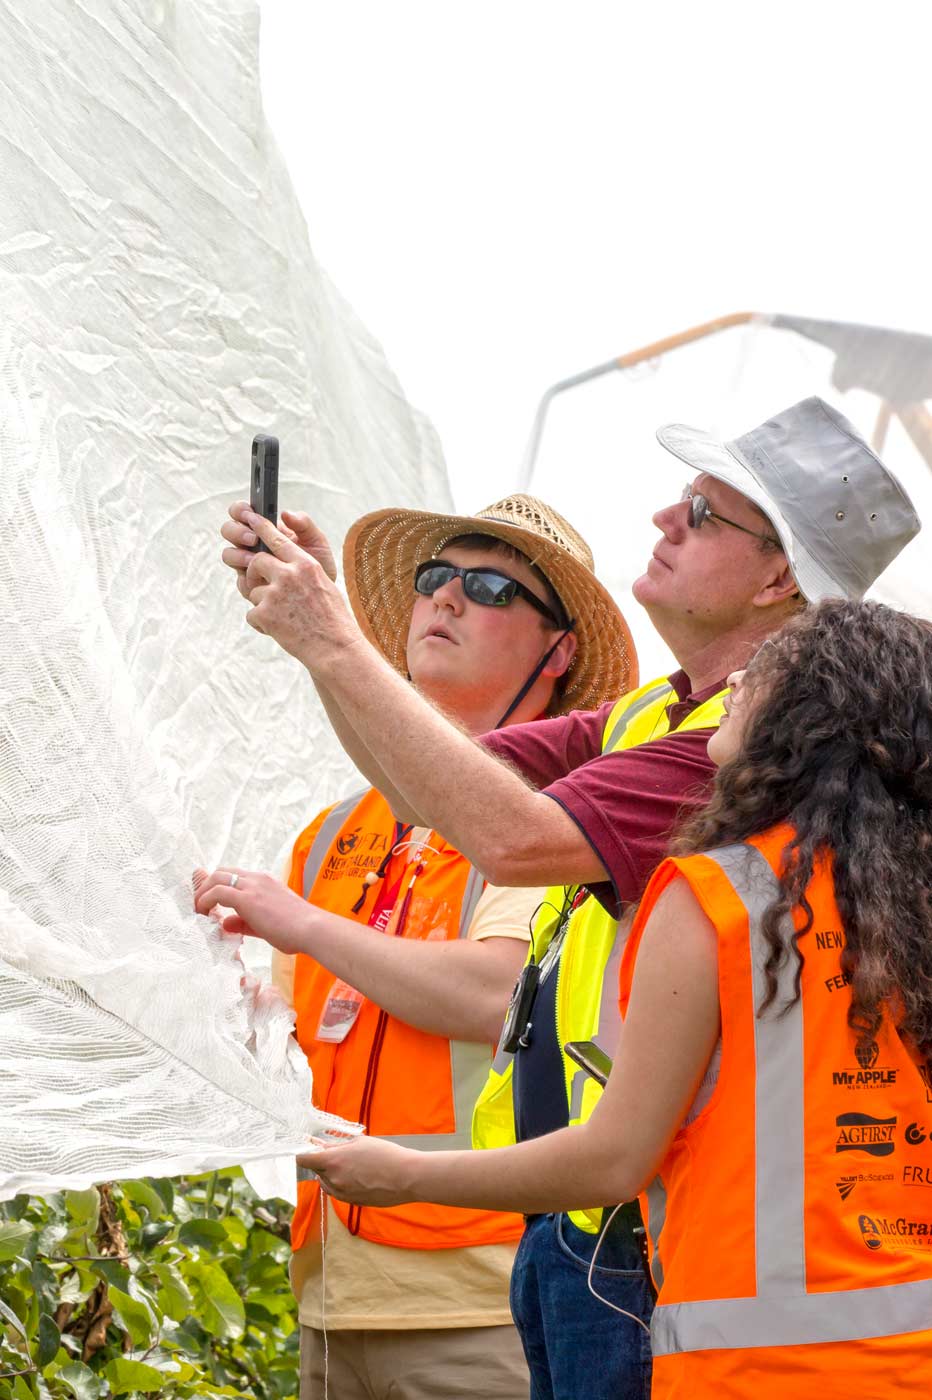 Adam Peters, left, Tom DeMarree, and Flor Maldonado closely inspect drape netting shortly after it was installed during a demonstration at Birdhurst Orchards in Motueka, New Zealand. <b>(TJ Mullinax/Good Fruit Grower)</b>